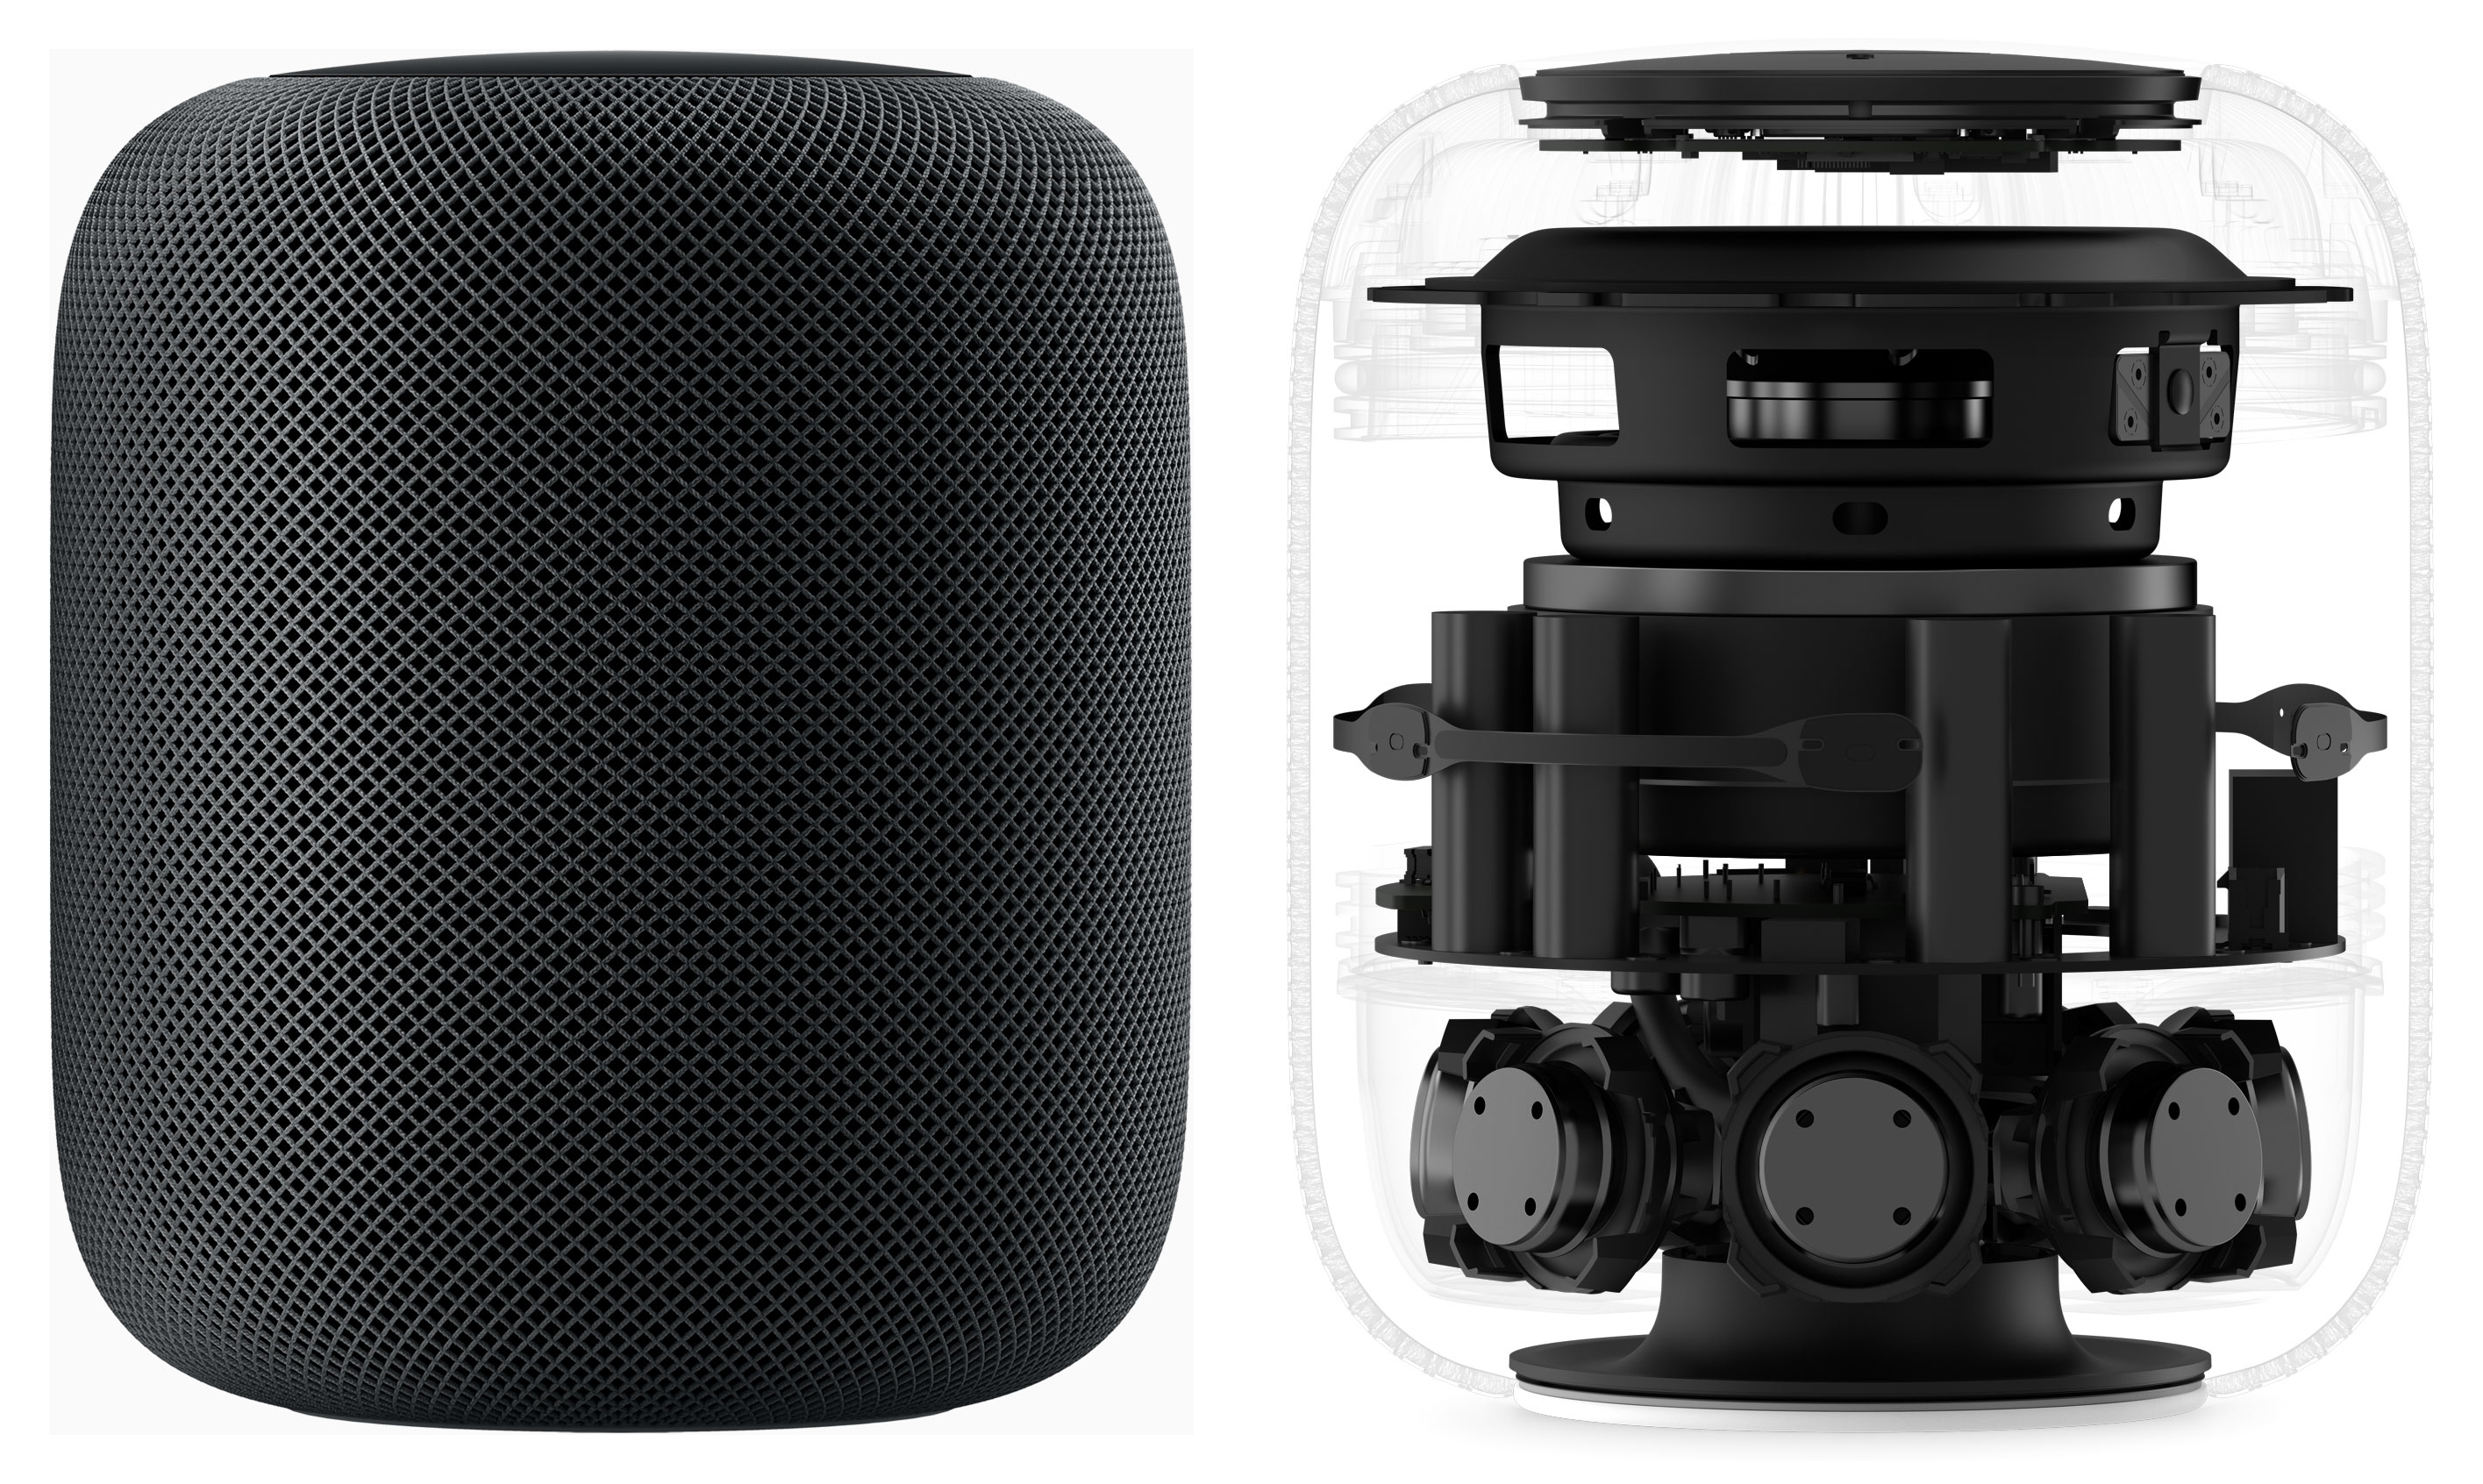 Ex-Apple employees work on a HomePod competitor